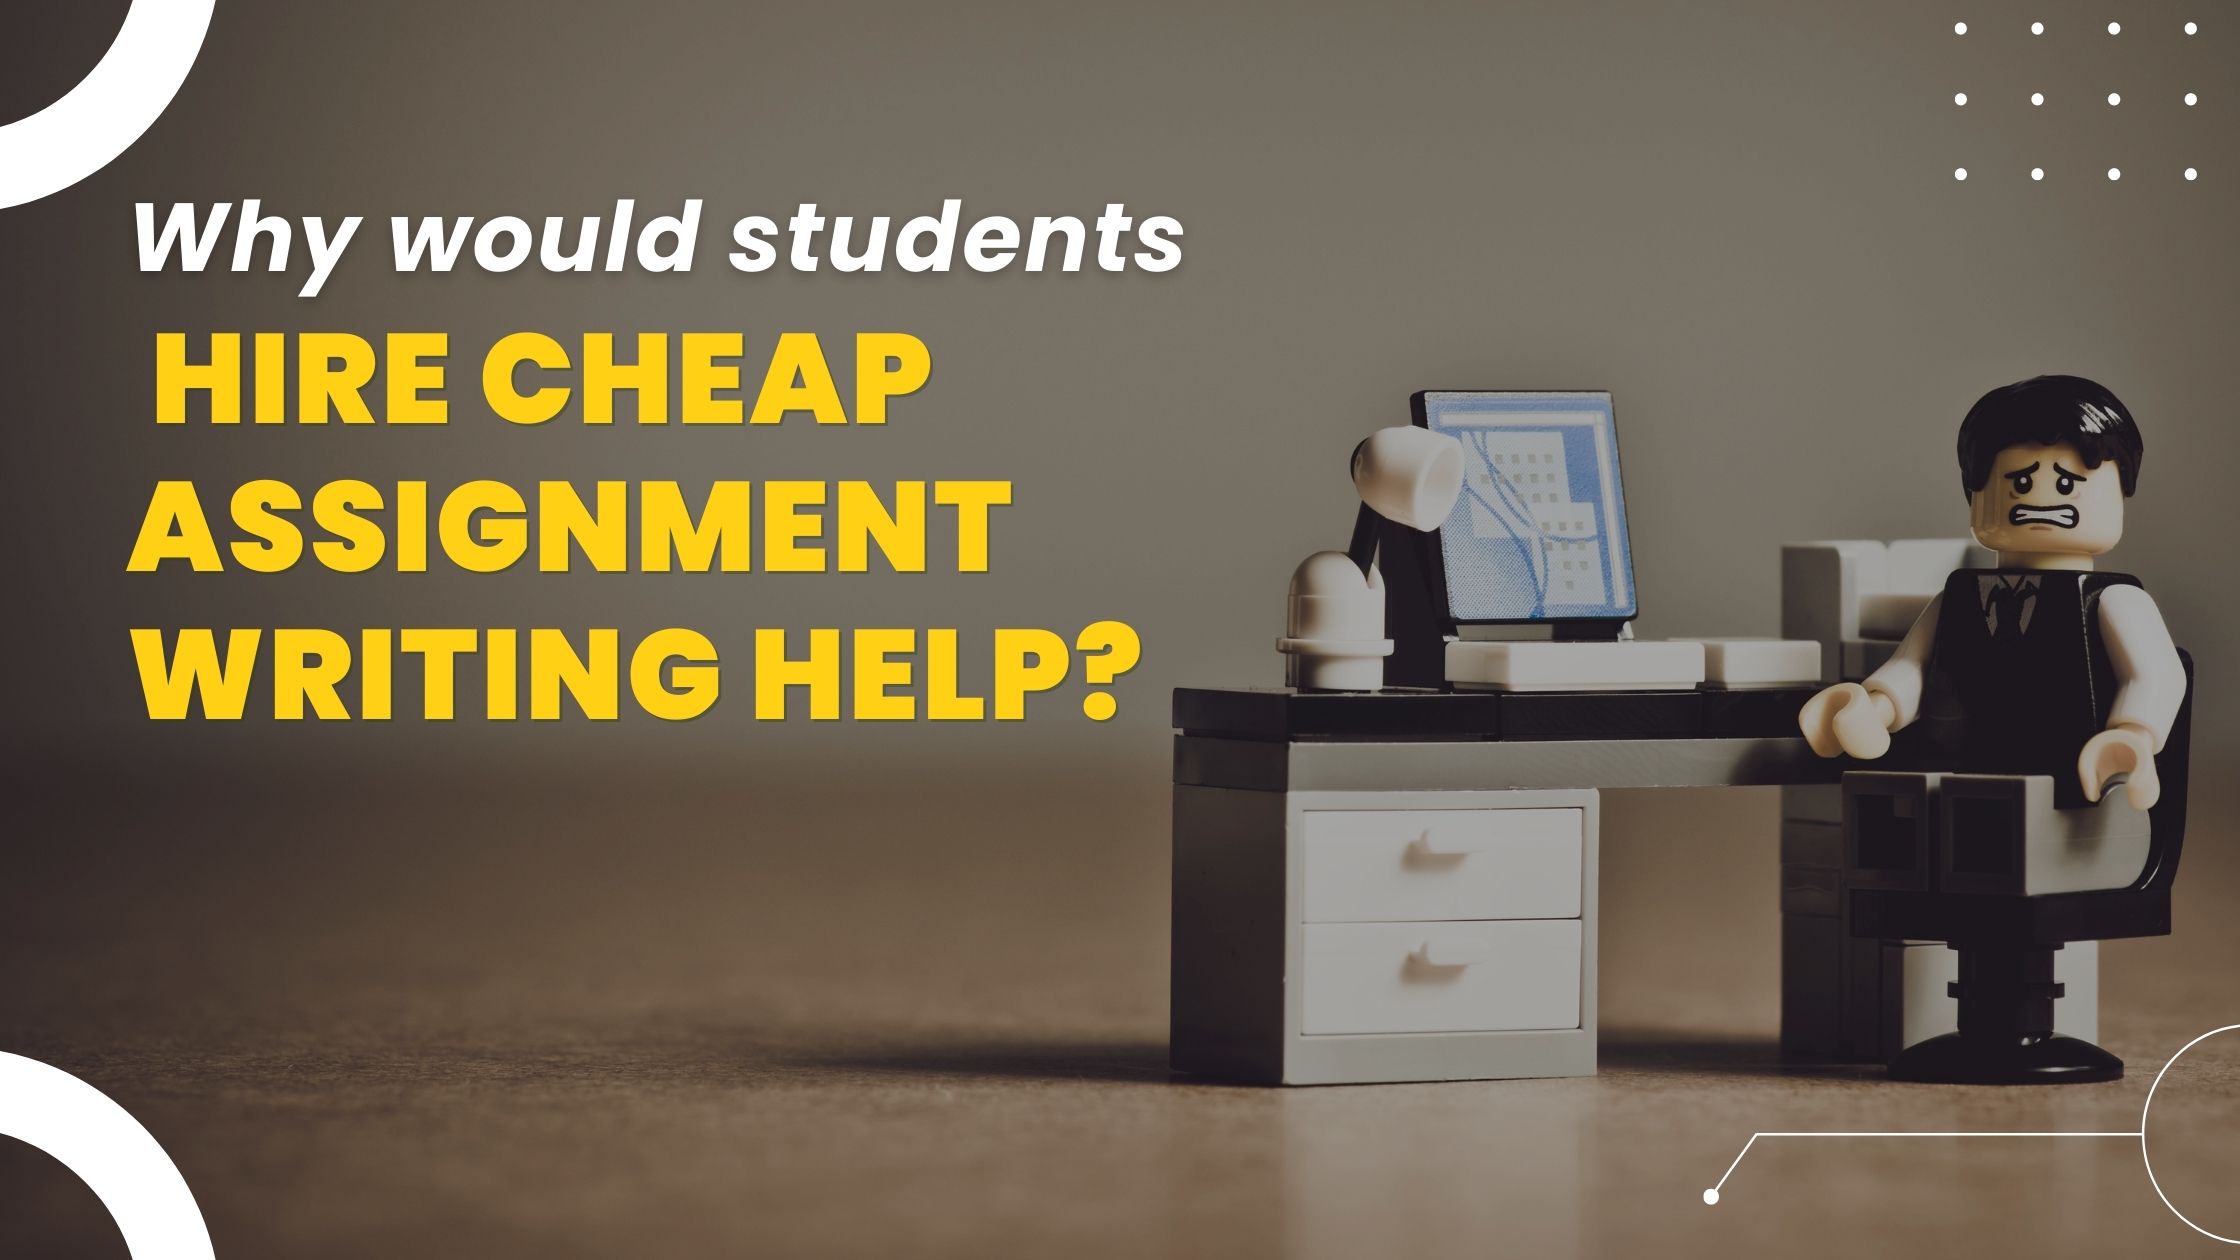 Why would students hire cheap assignment writing help